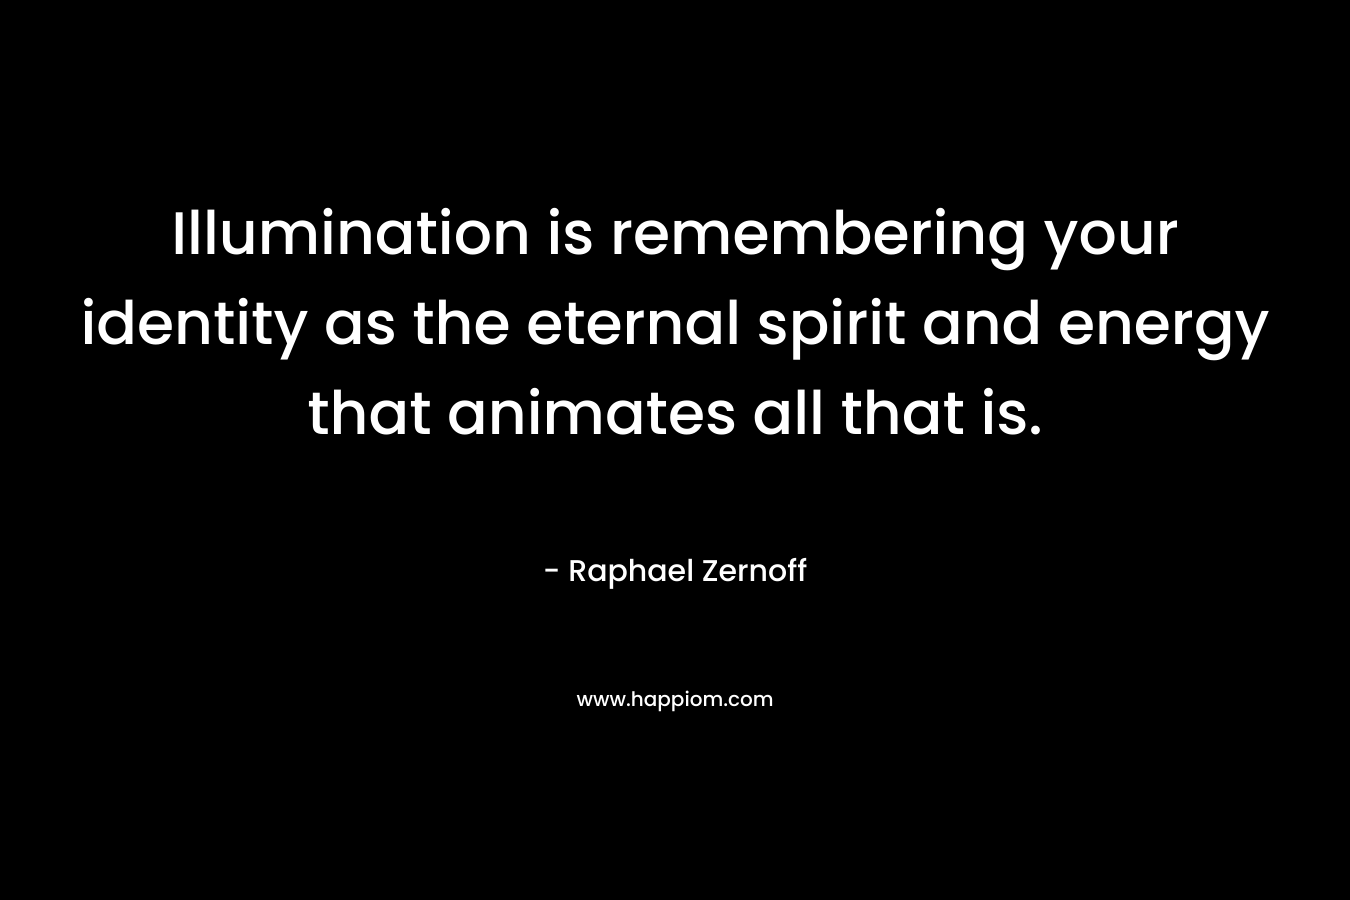 Illumination is remembering your identity as the eternal spirit and energy that animates all that is. – Raphael Zernoff